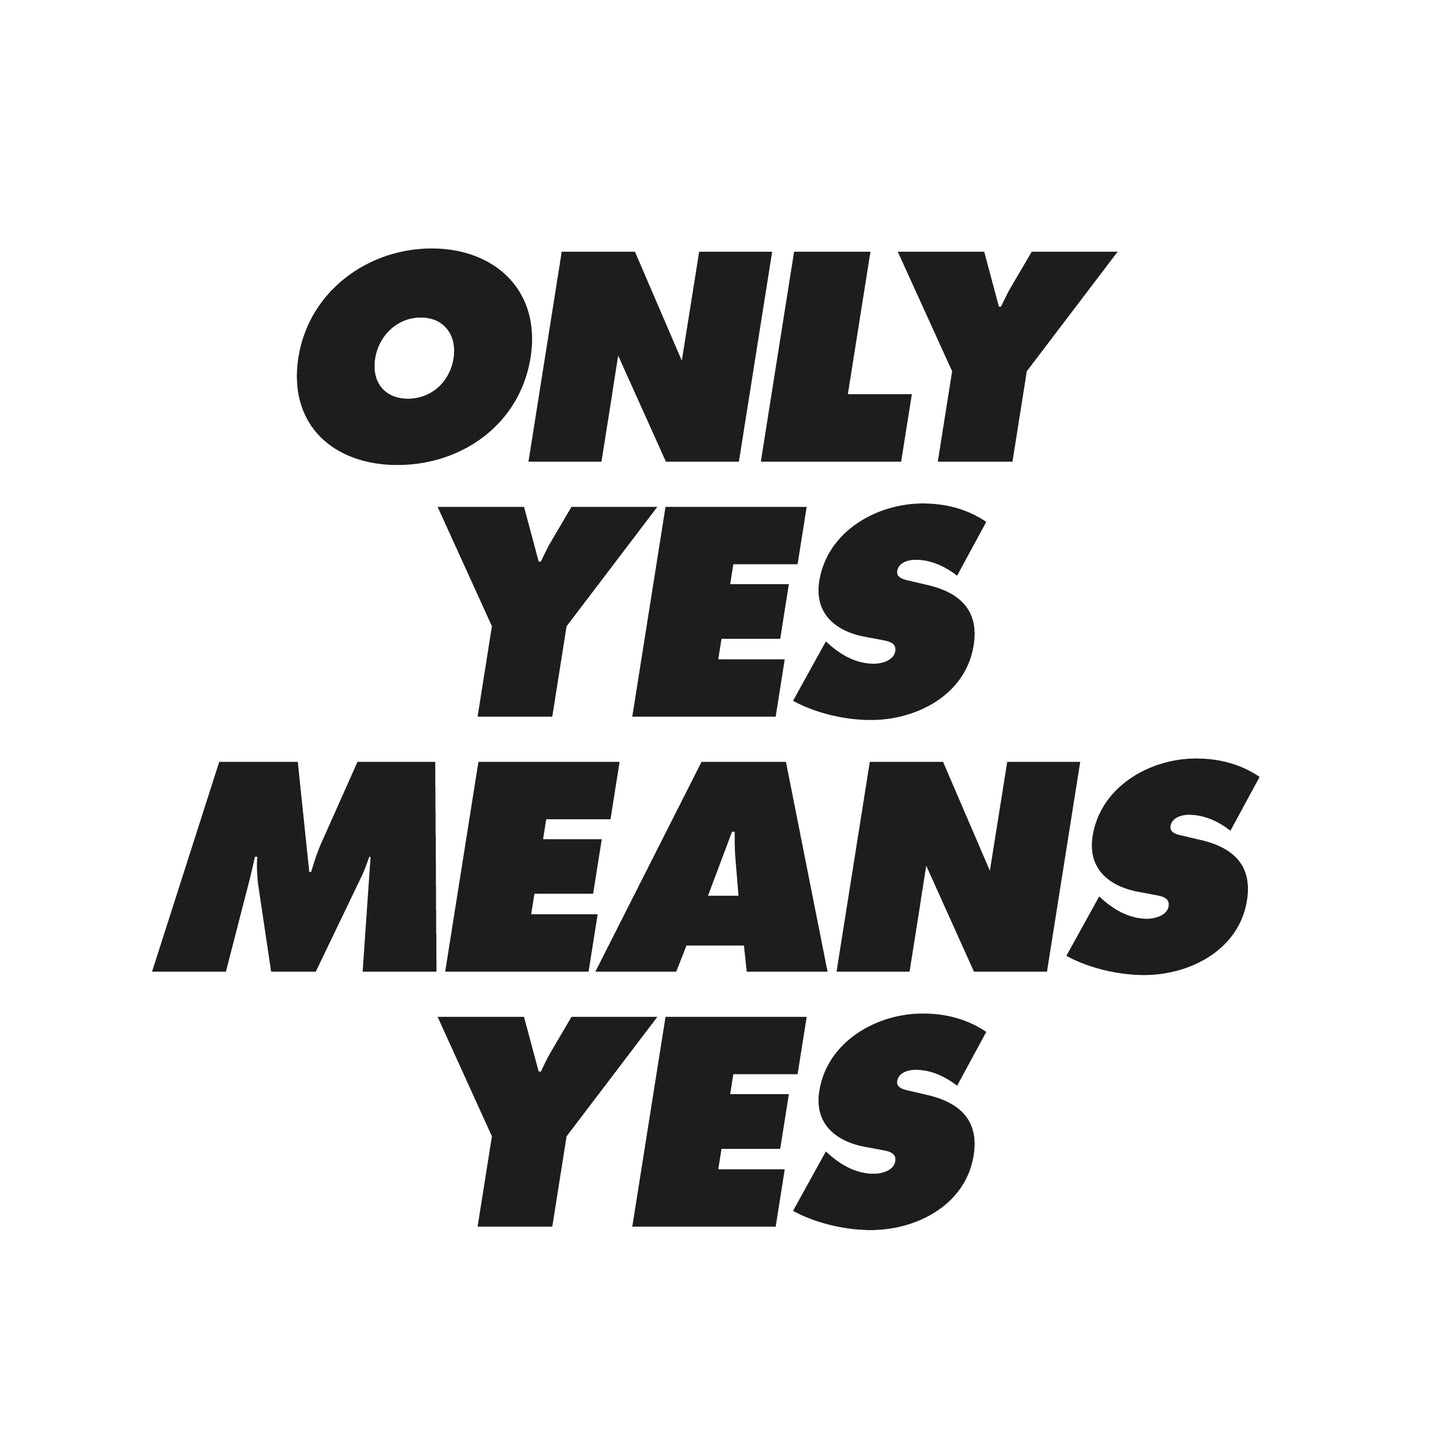 Mütze mit braunem Patch "Only yes means yes"